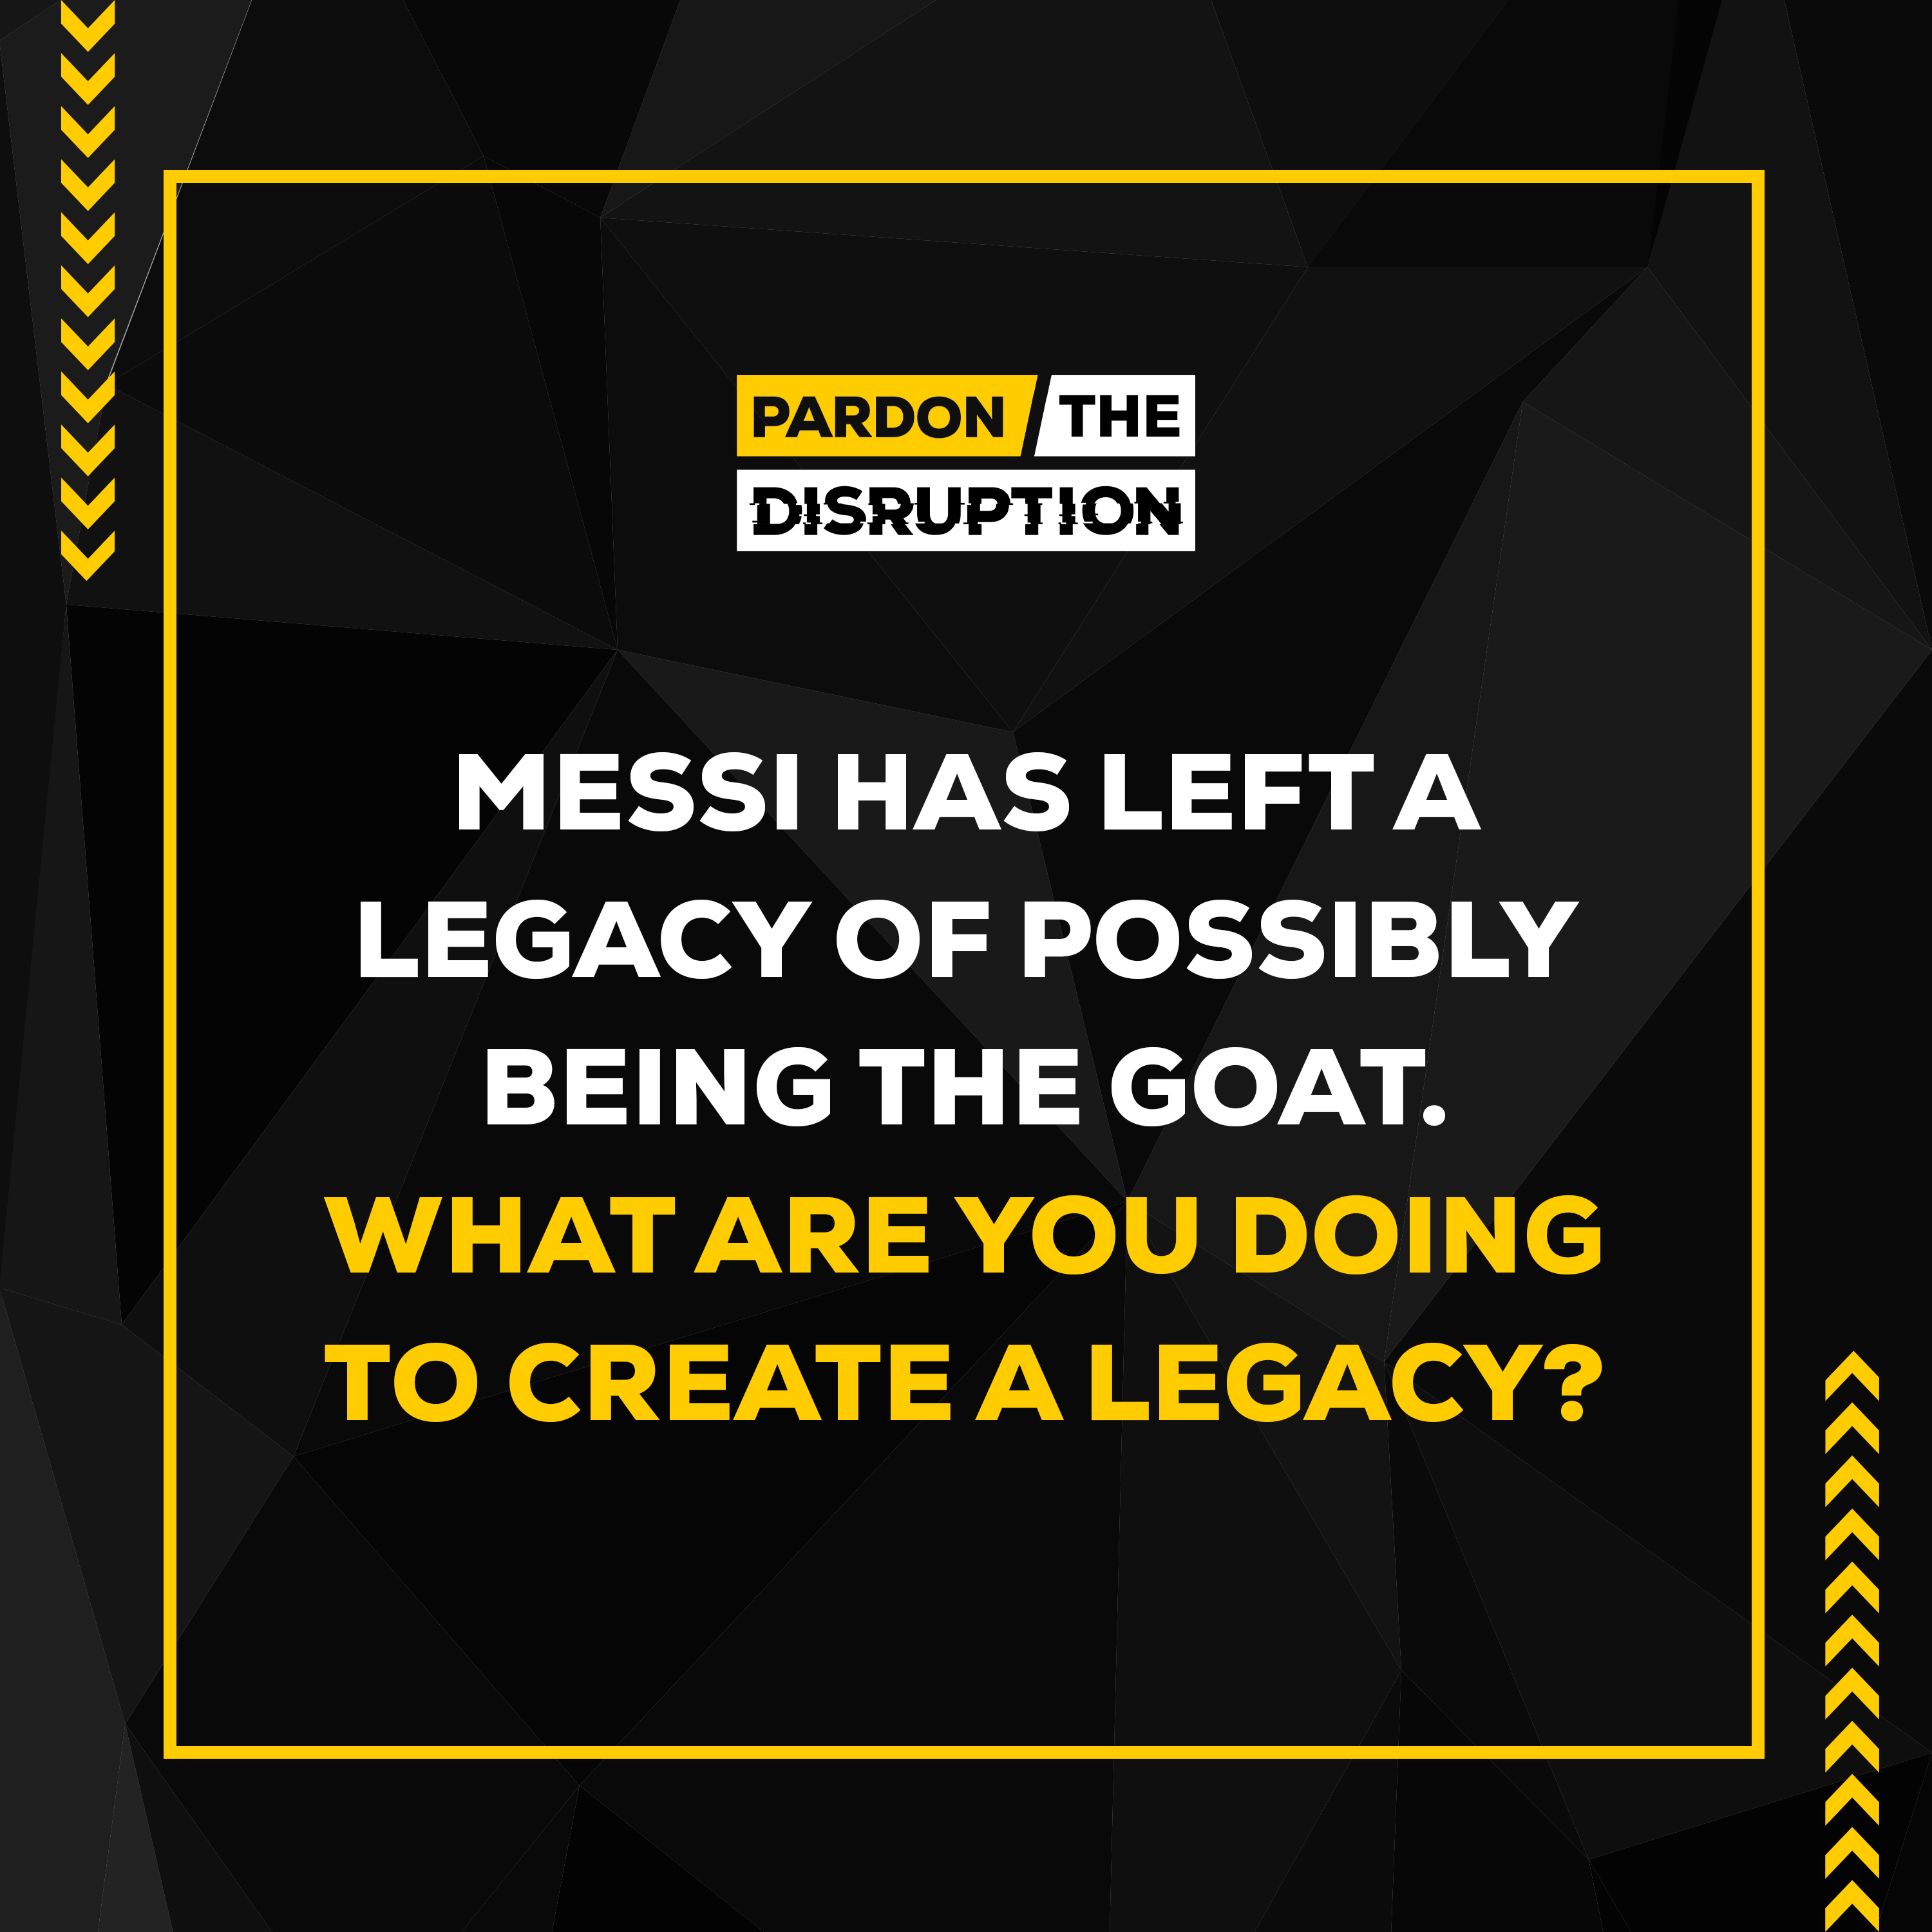 Messi has left a legacy of possibly being the GOAT. What are you doing to create a legacy?